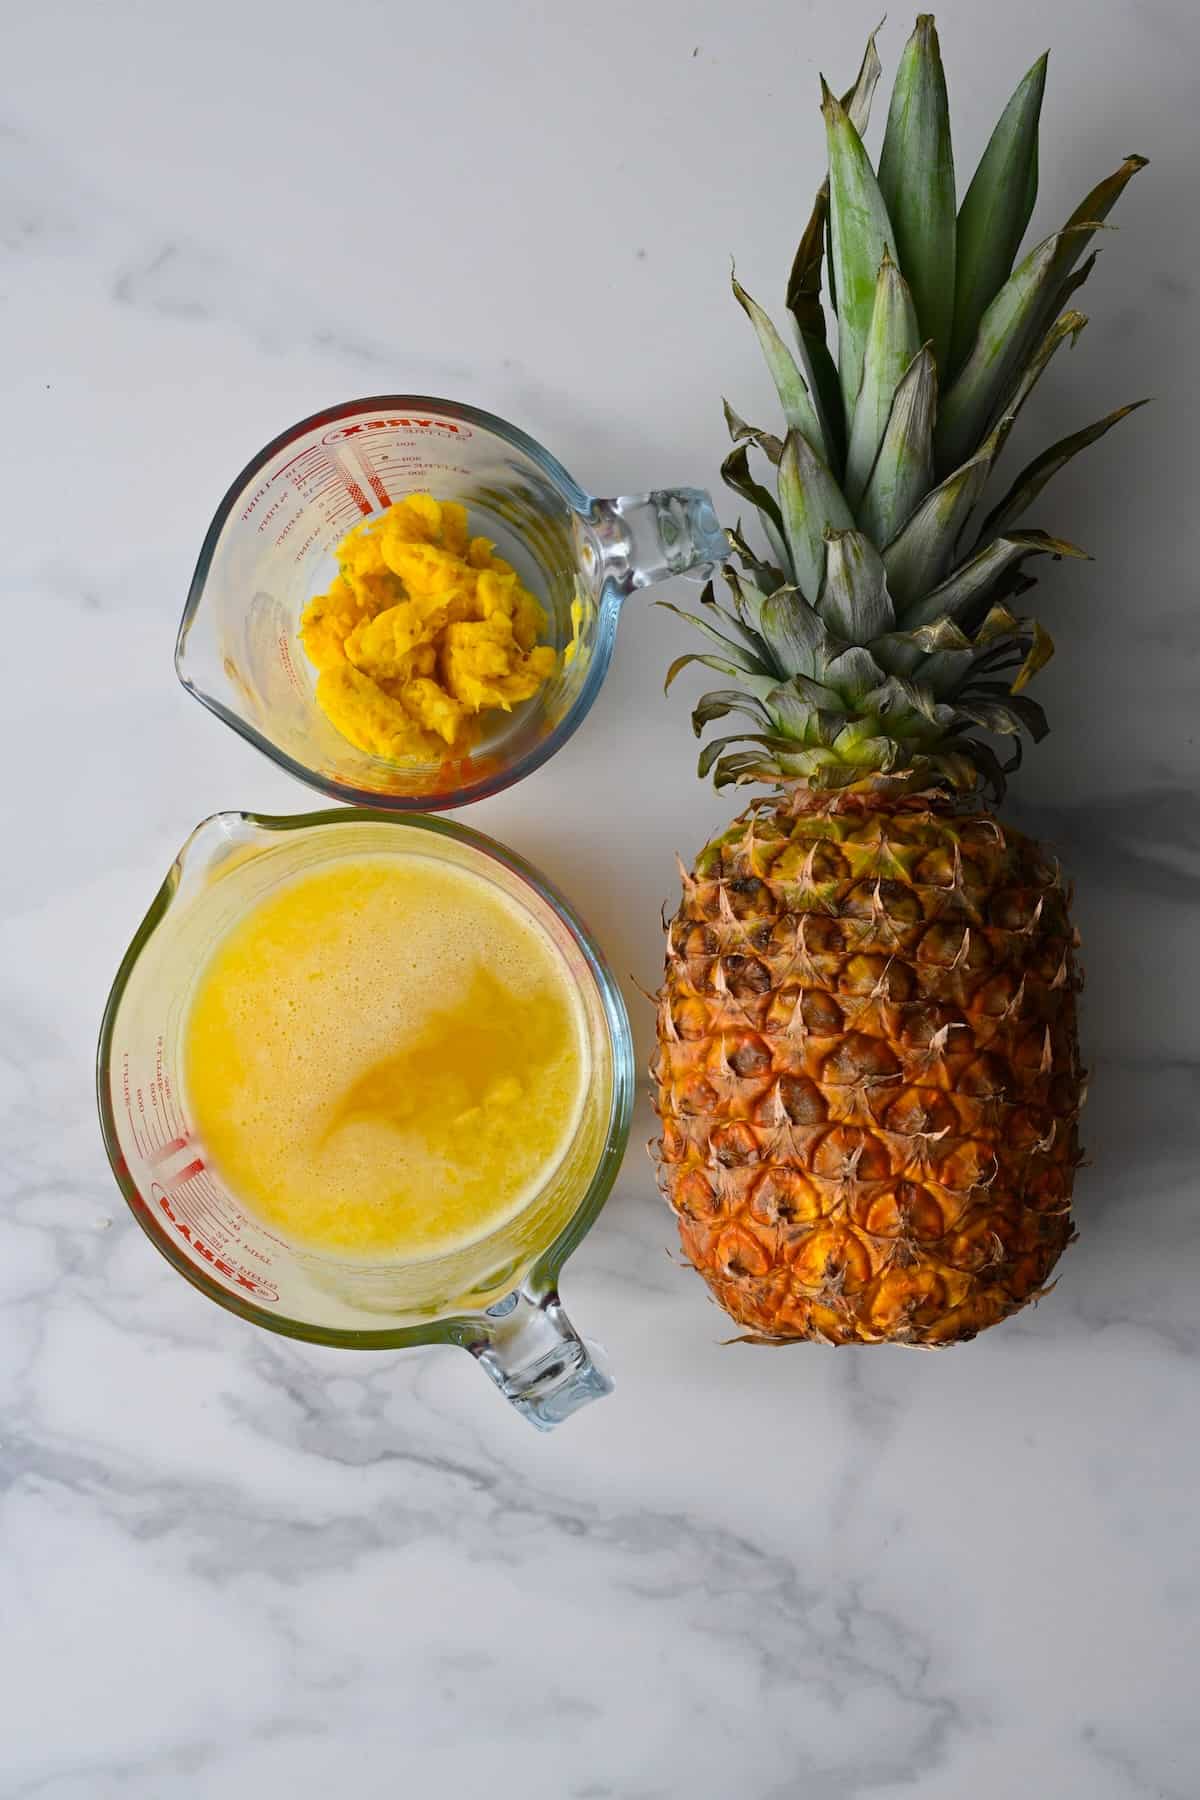 A jug with fresh juice from pineapple and a pineapple next to it